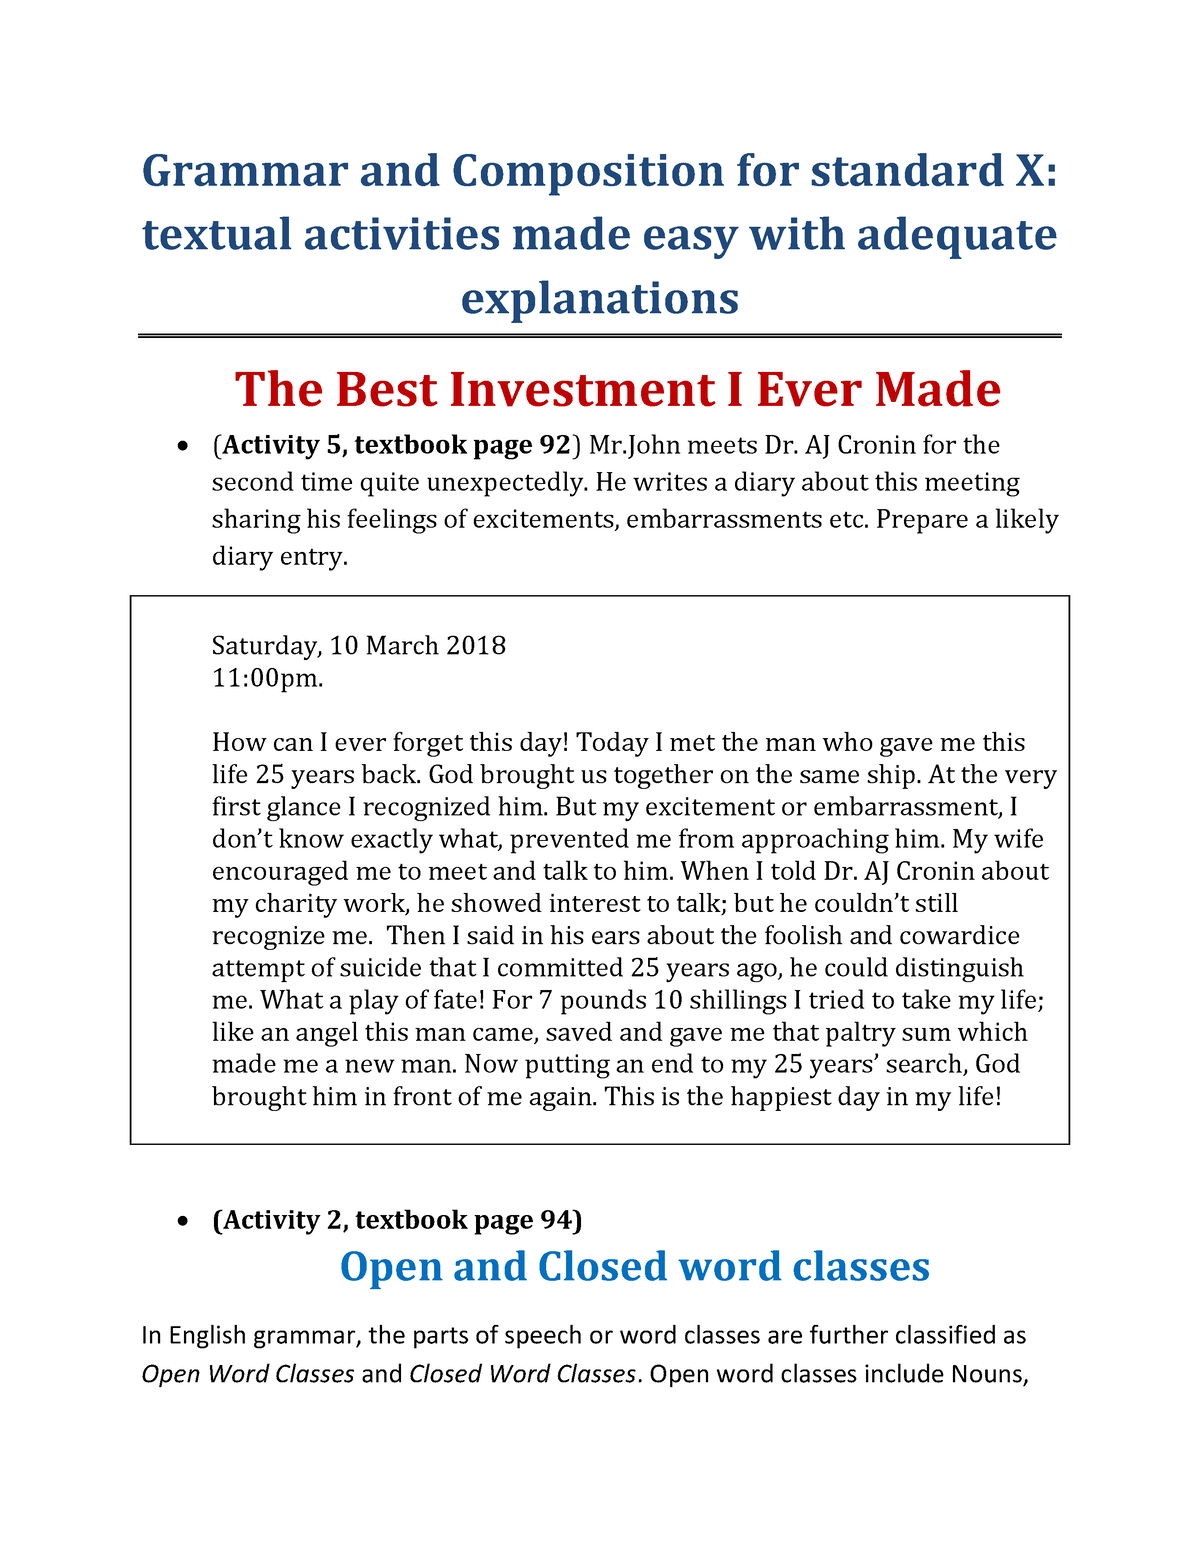 the best investment i ever made essay pdf